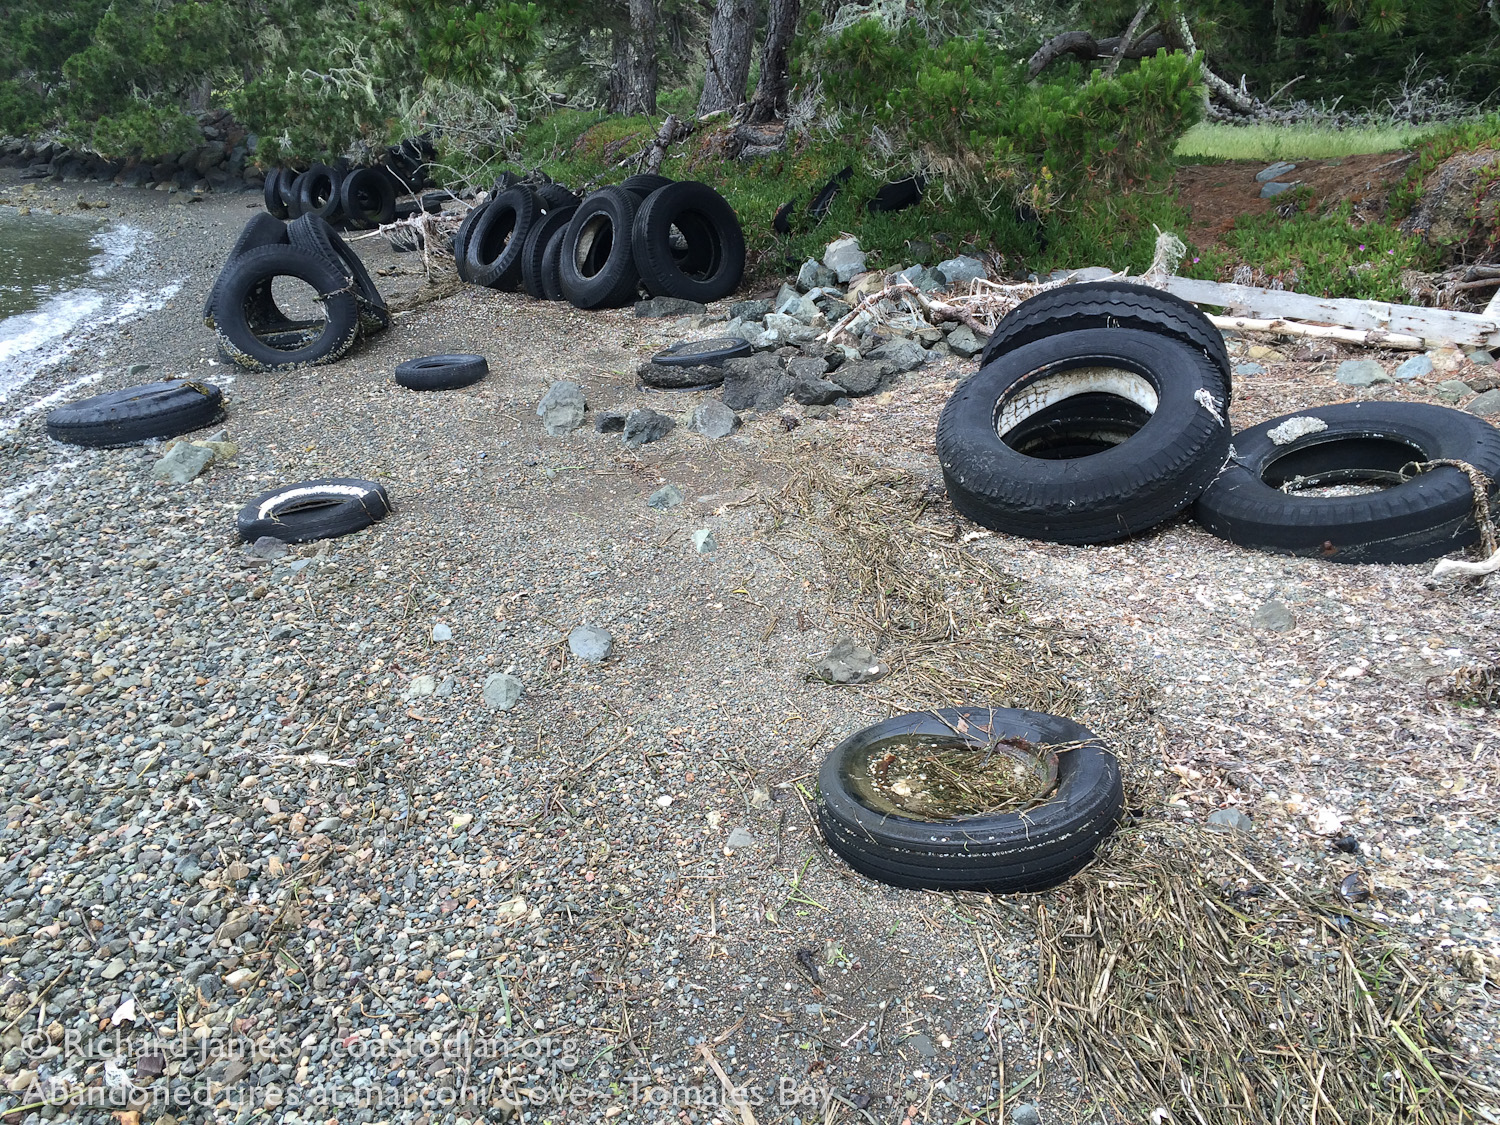 A few of the hundreds of abandoned tires at Marconi Cove - Tomales Bay ©Richard James - coastodian.org